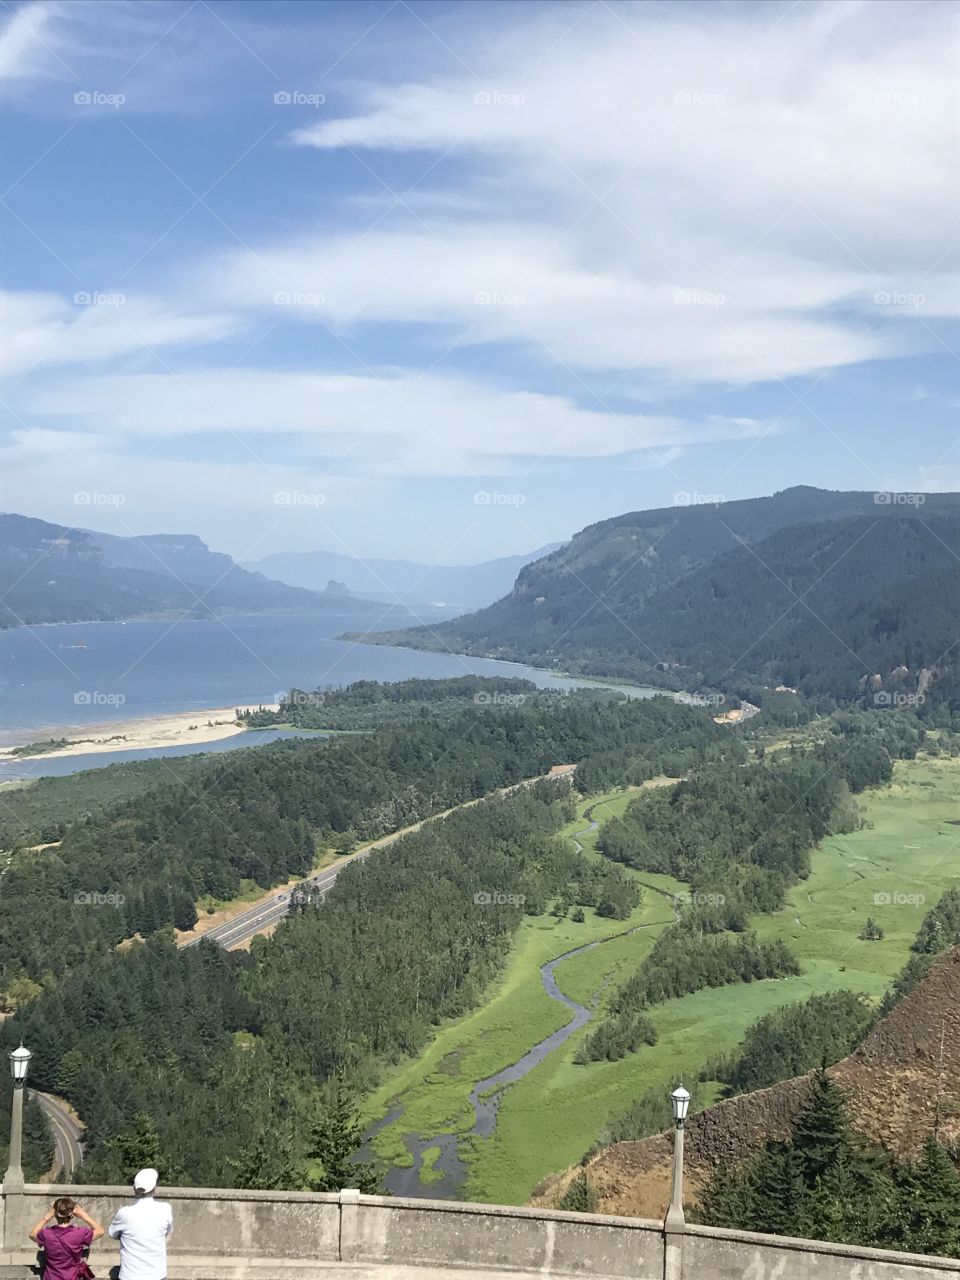 Columbia River Gorge from Vista House